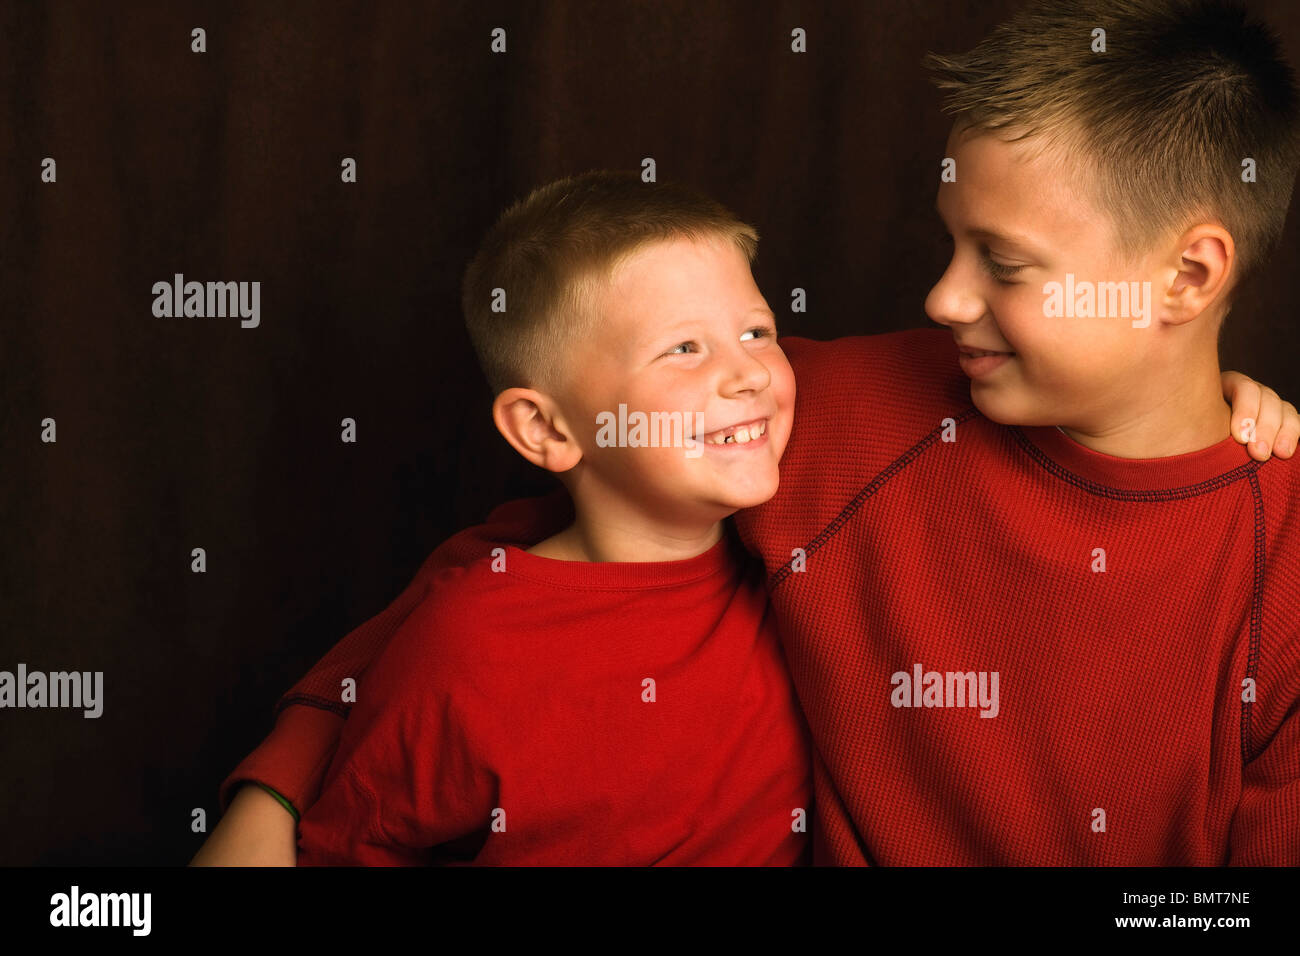 Two Brothers Wearing Red Shirts Stock Photo